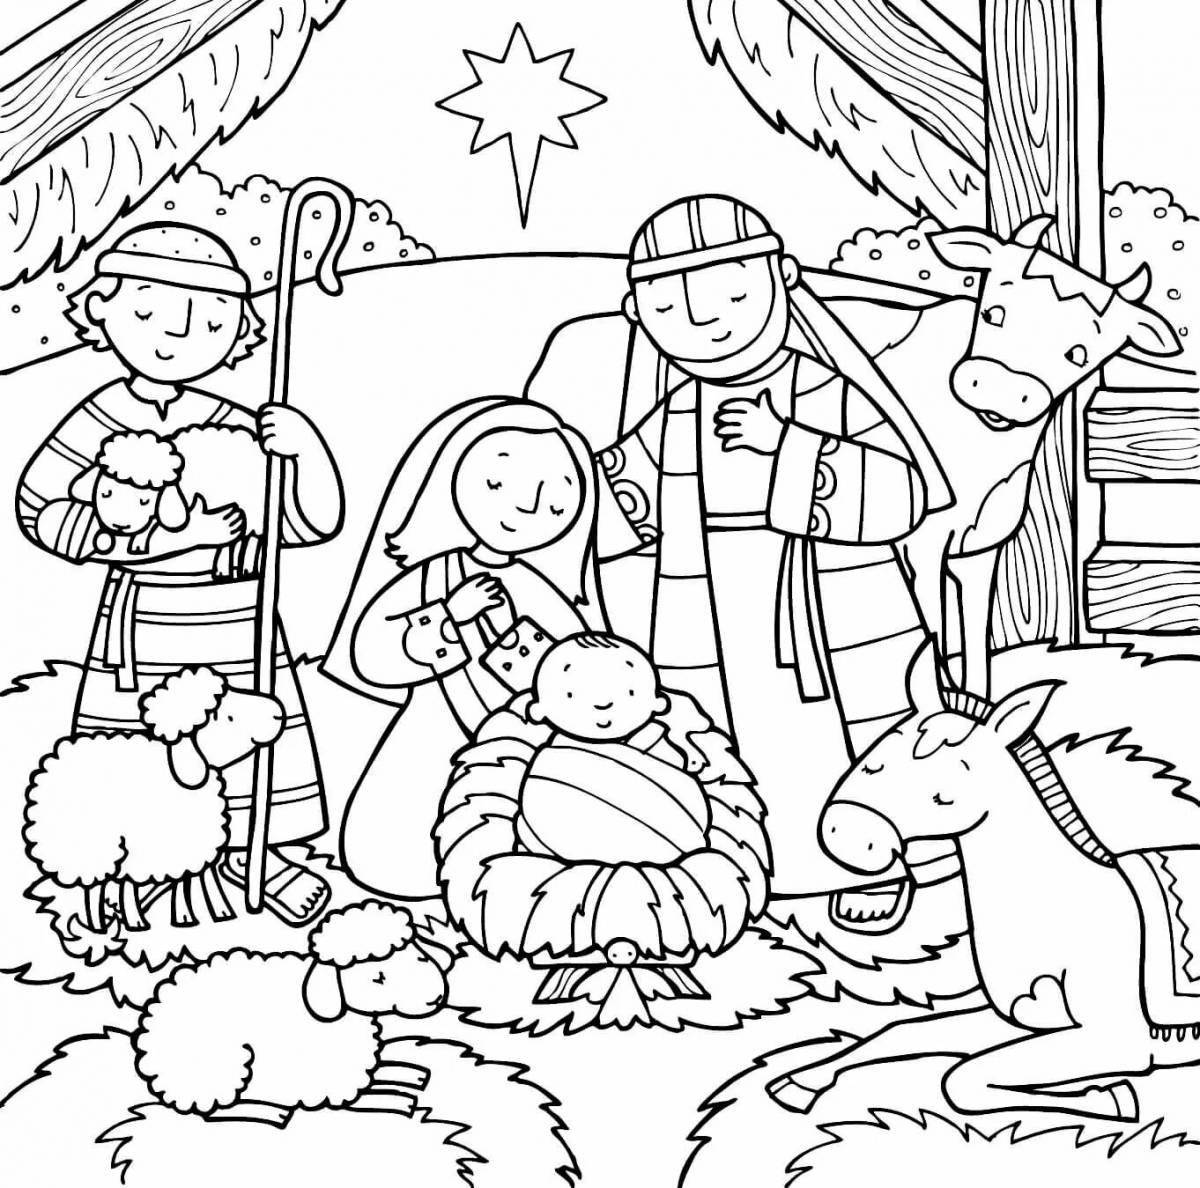 Amazing Christmas coloring book for 6-7 year olds